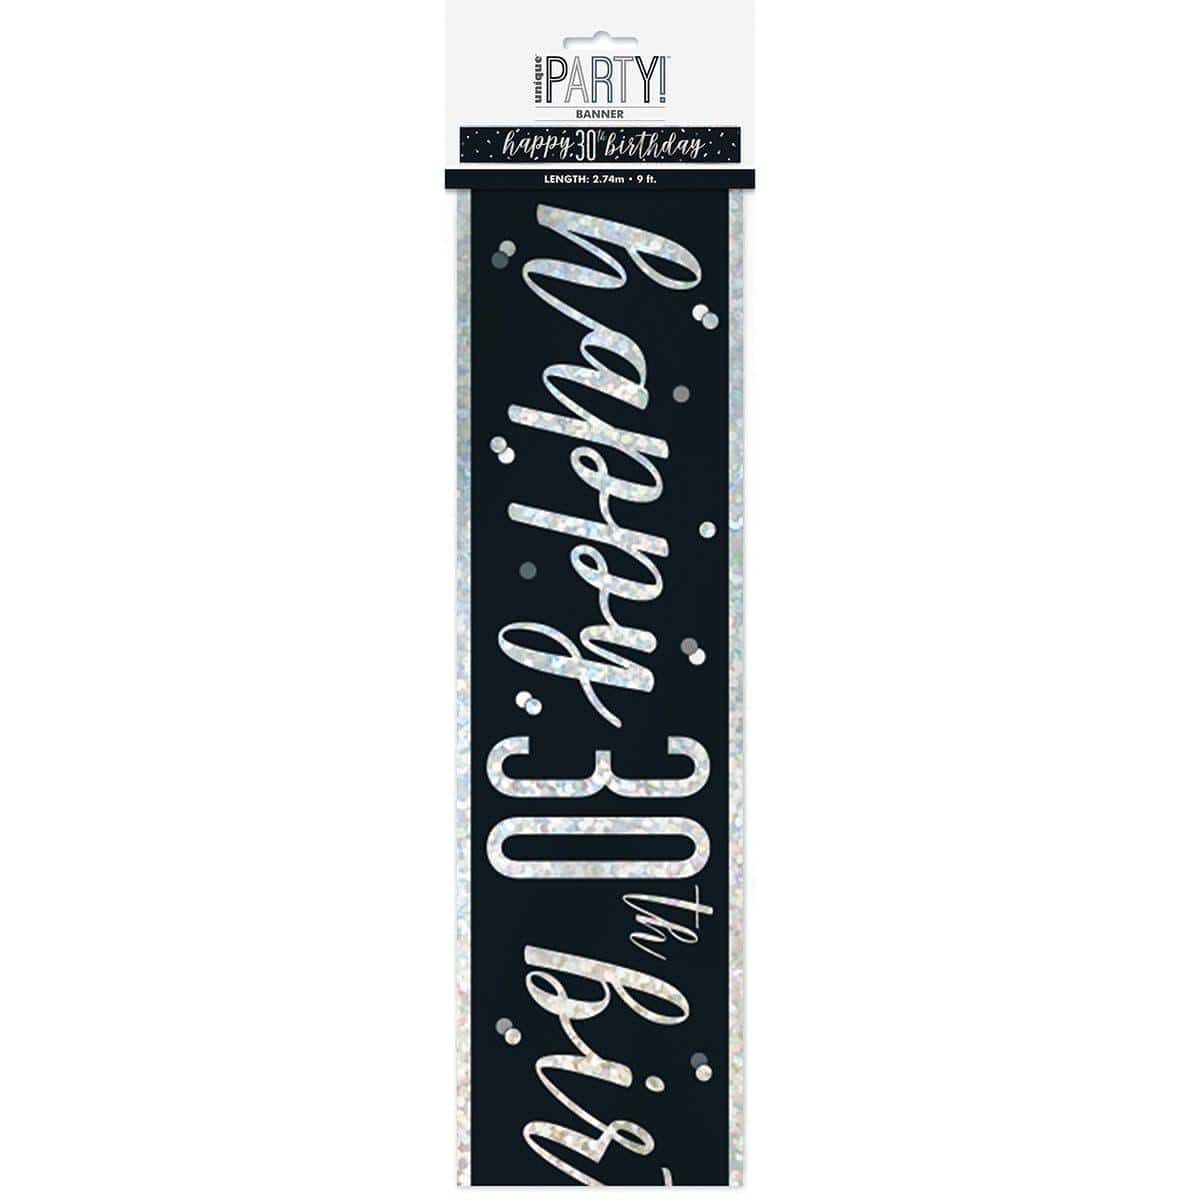 Buy Age Specific Birthday Happy Birthday Black/Silver - Foil Banner - 30th sold at Party Expert